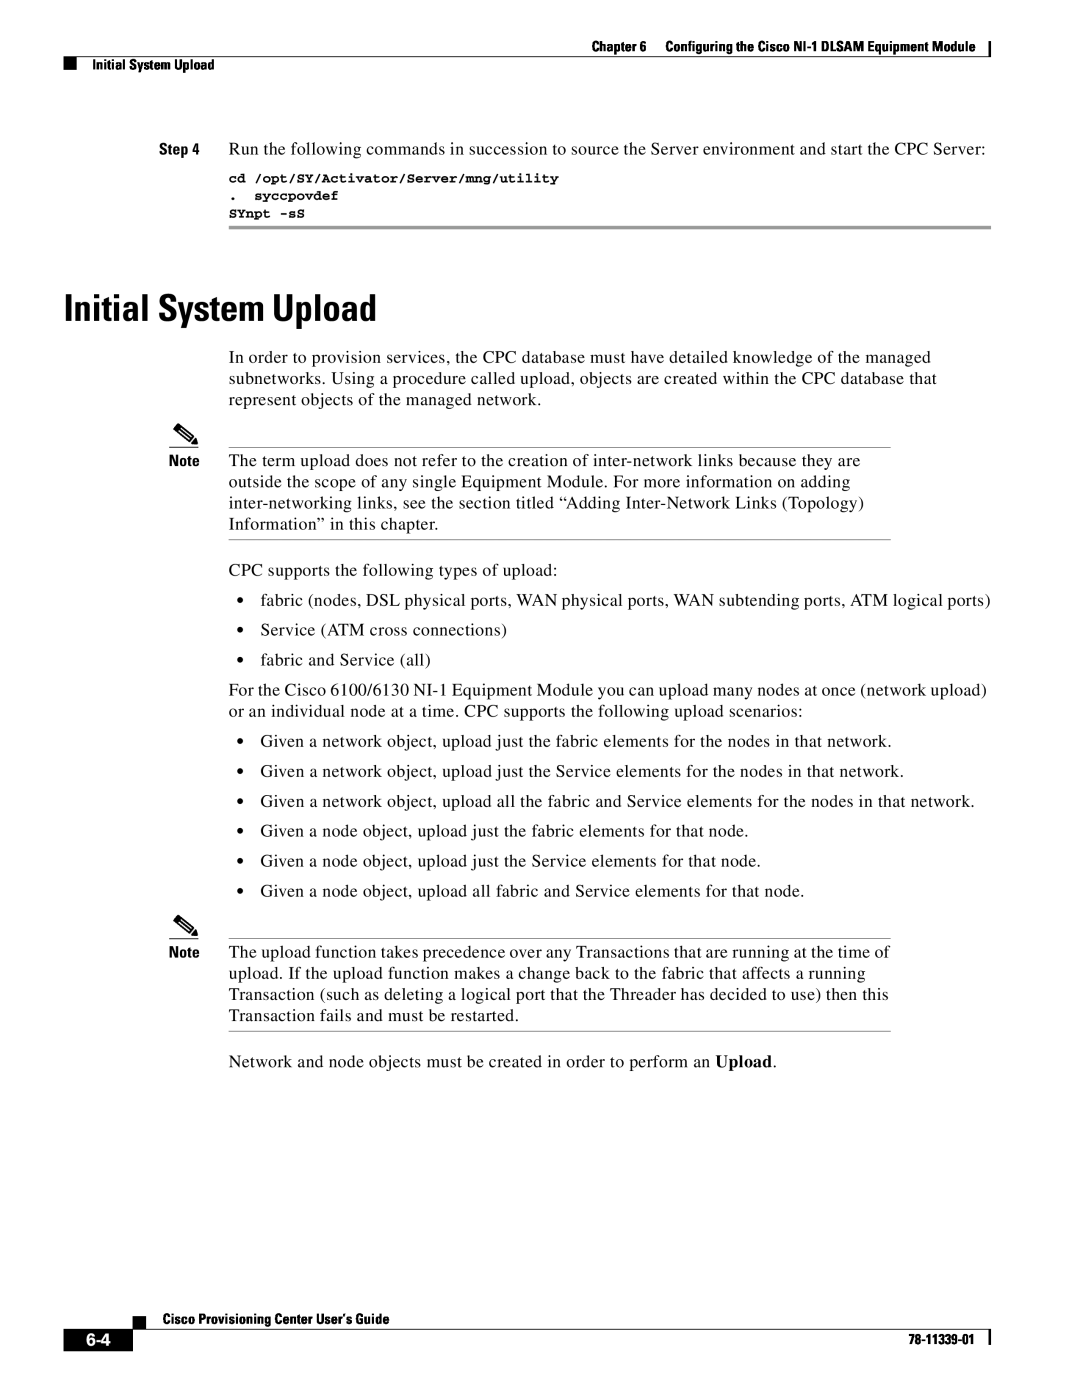 Cisco Systems NI-1 manual Initial System Upload 